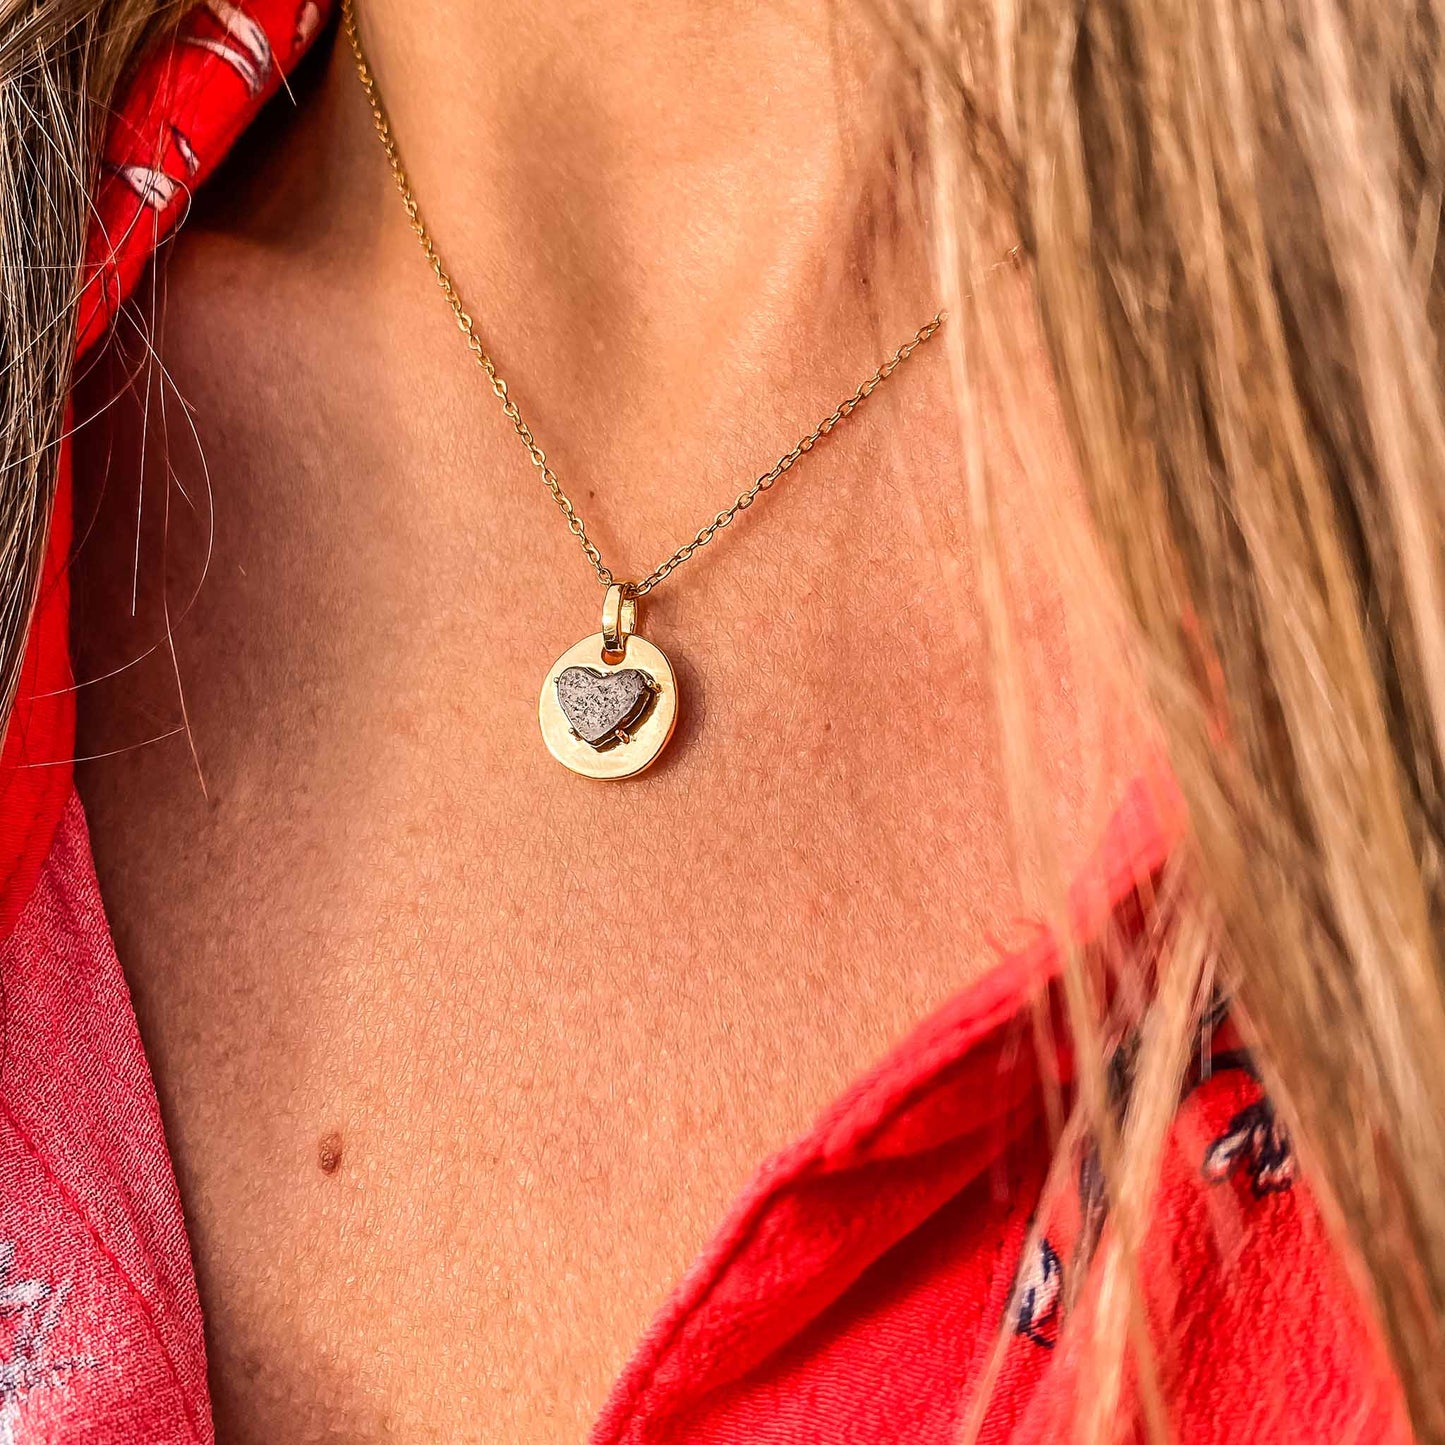 Garnet is January's birthstone and the gem for the 2nd wedding anniversary. This unique charm necklace is the perfect gift for yourself, Mother's Day, Valentine's Day, graduation, Christmas and birthdays. A personalized gift idea for every mom, grandma, bride, bridesmaid, daughter, wife, mother-in-law & loved one.